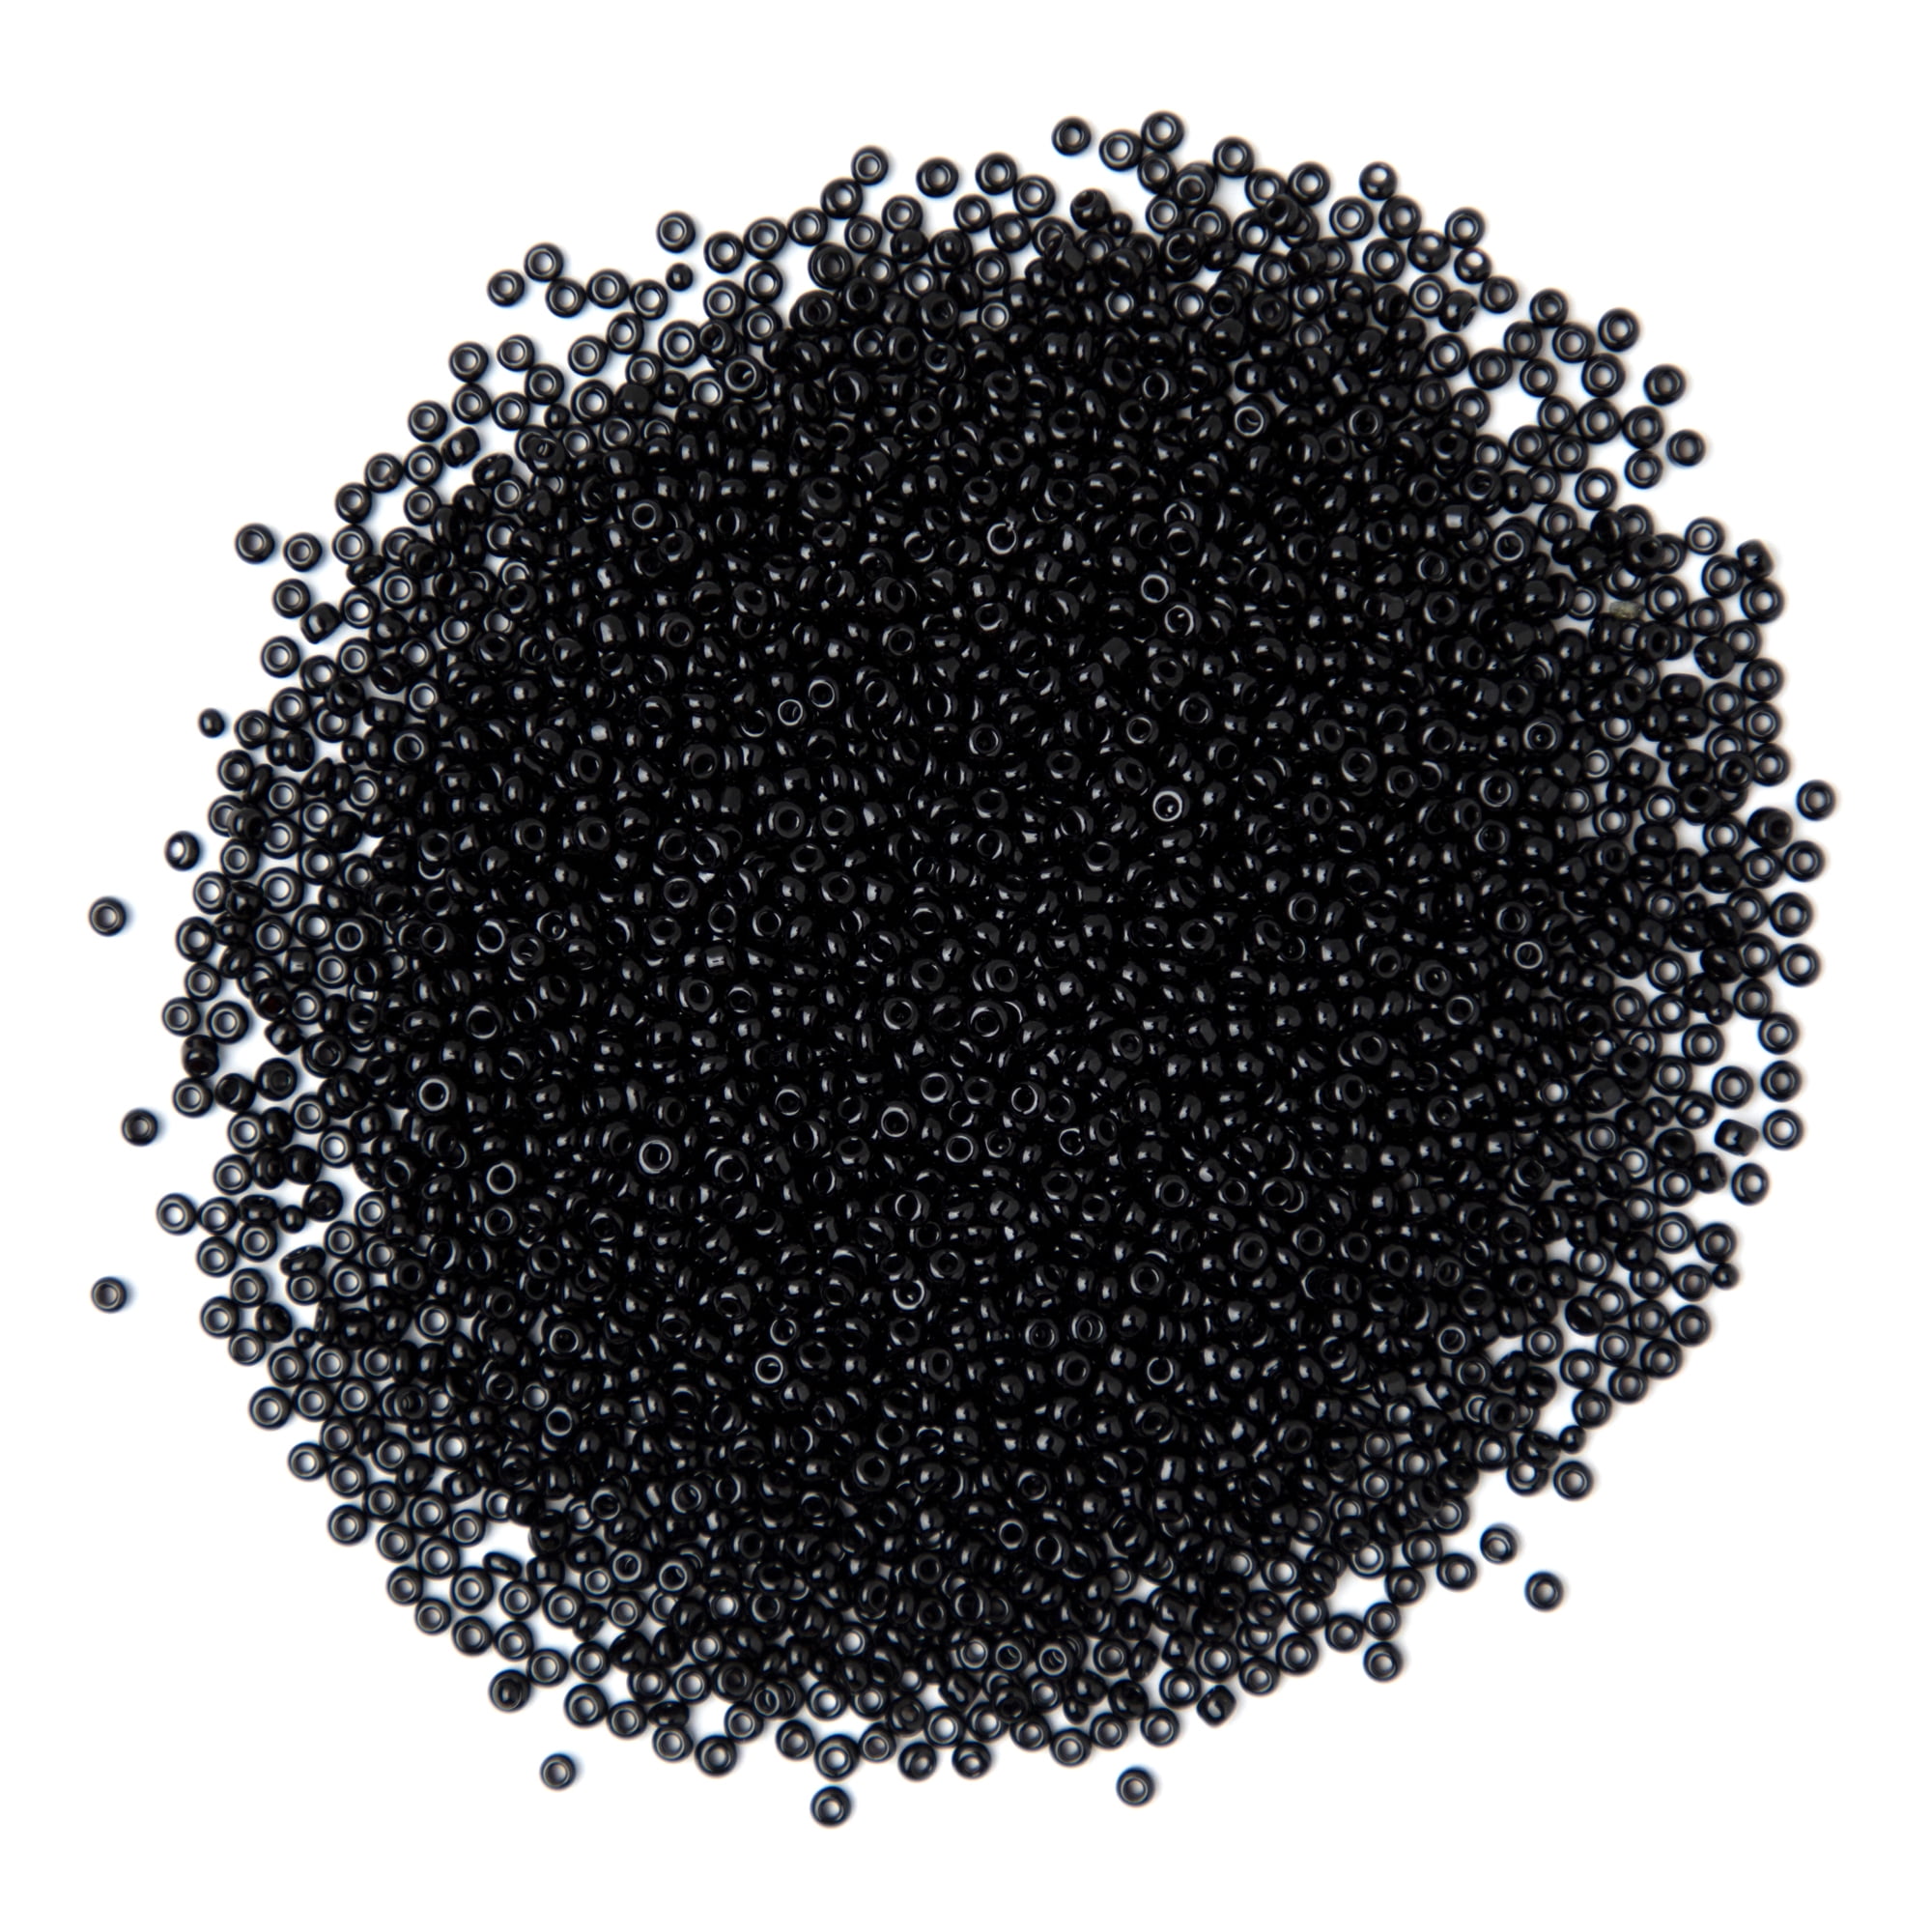 Cousin DIY 1.41 Oz. Black Seed Beads, 2500+ Pieces